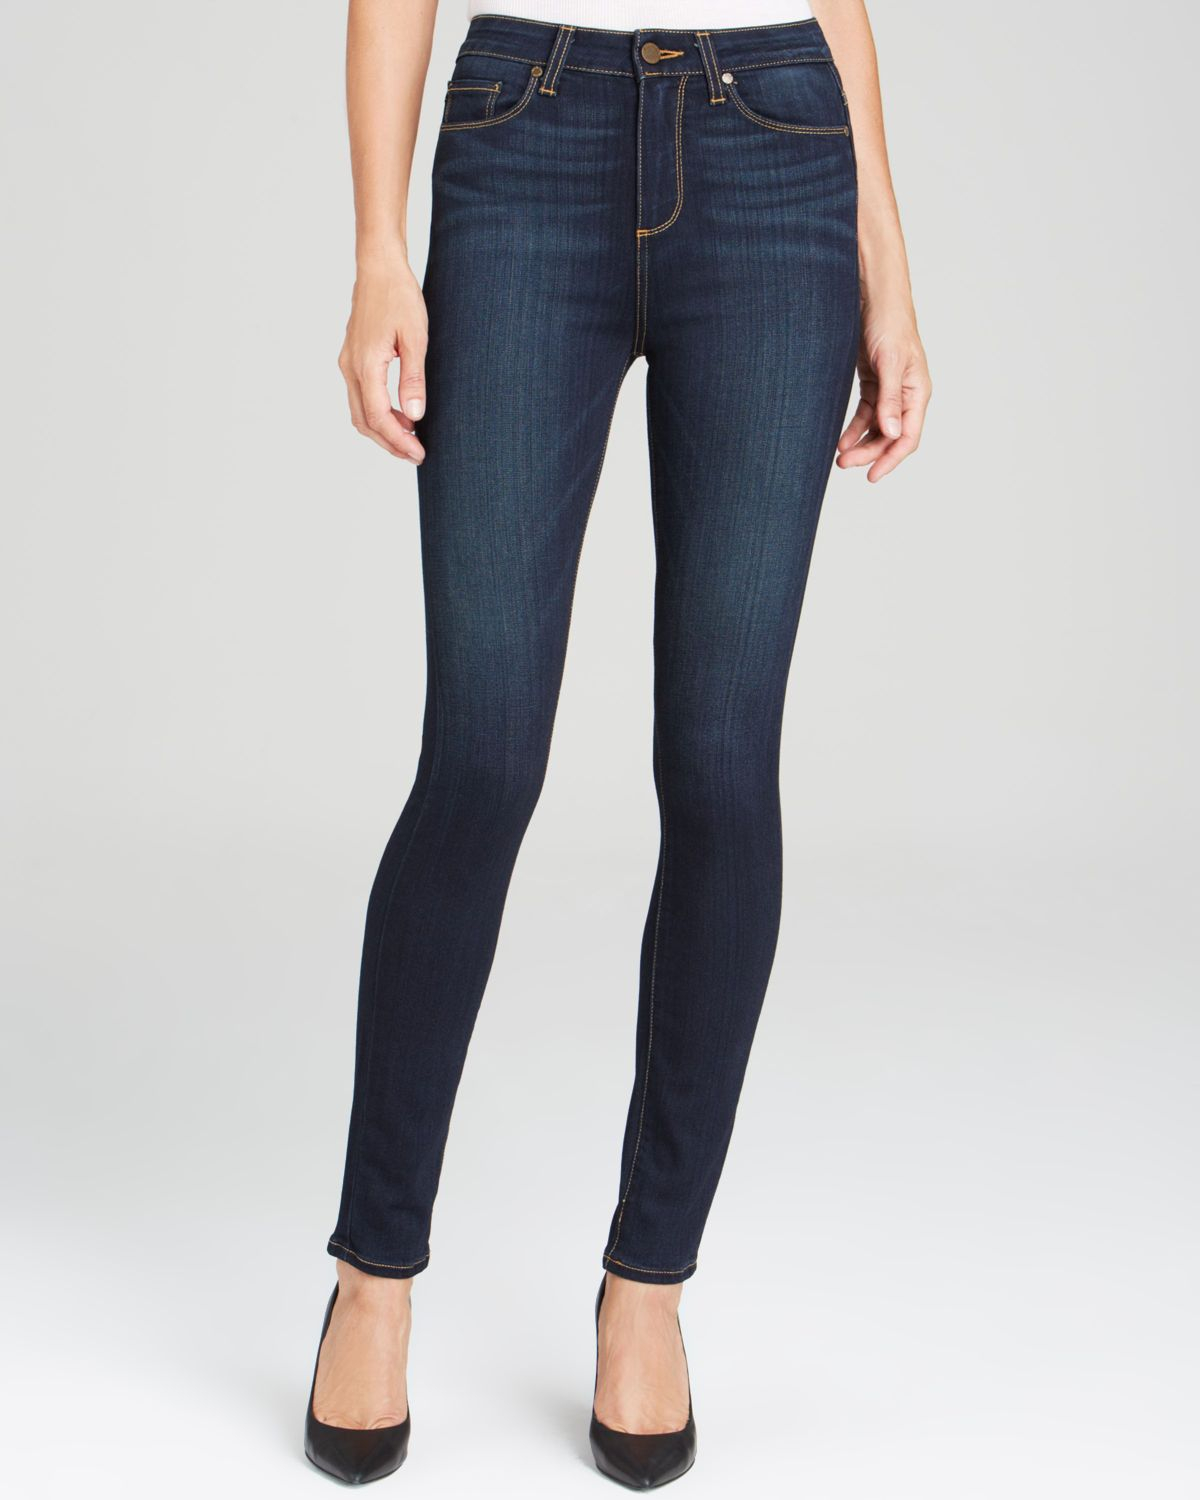 Paige Jeans - Margot Super High Rise Ultra Skinny In Armstrong in Blue ...